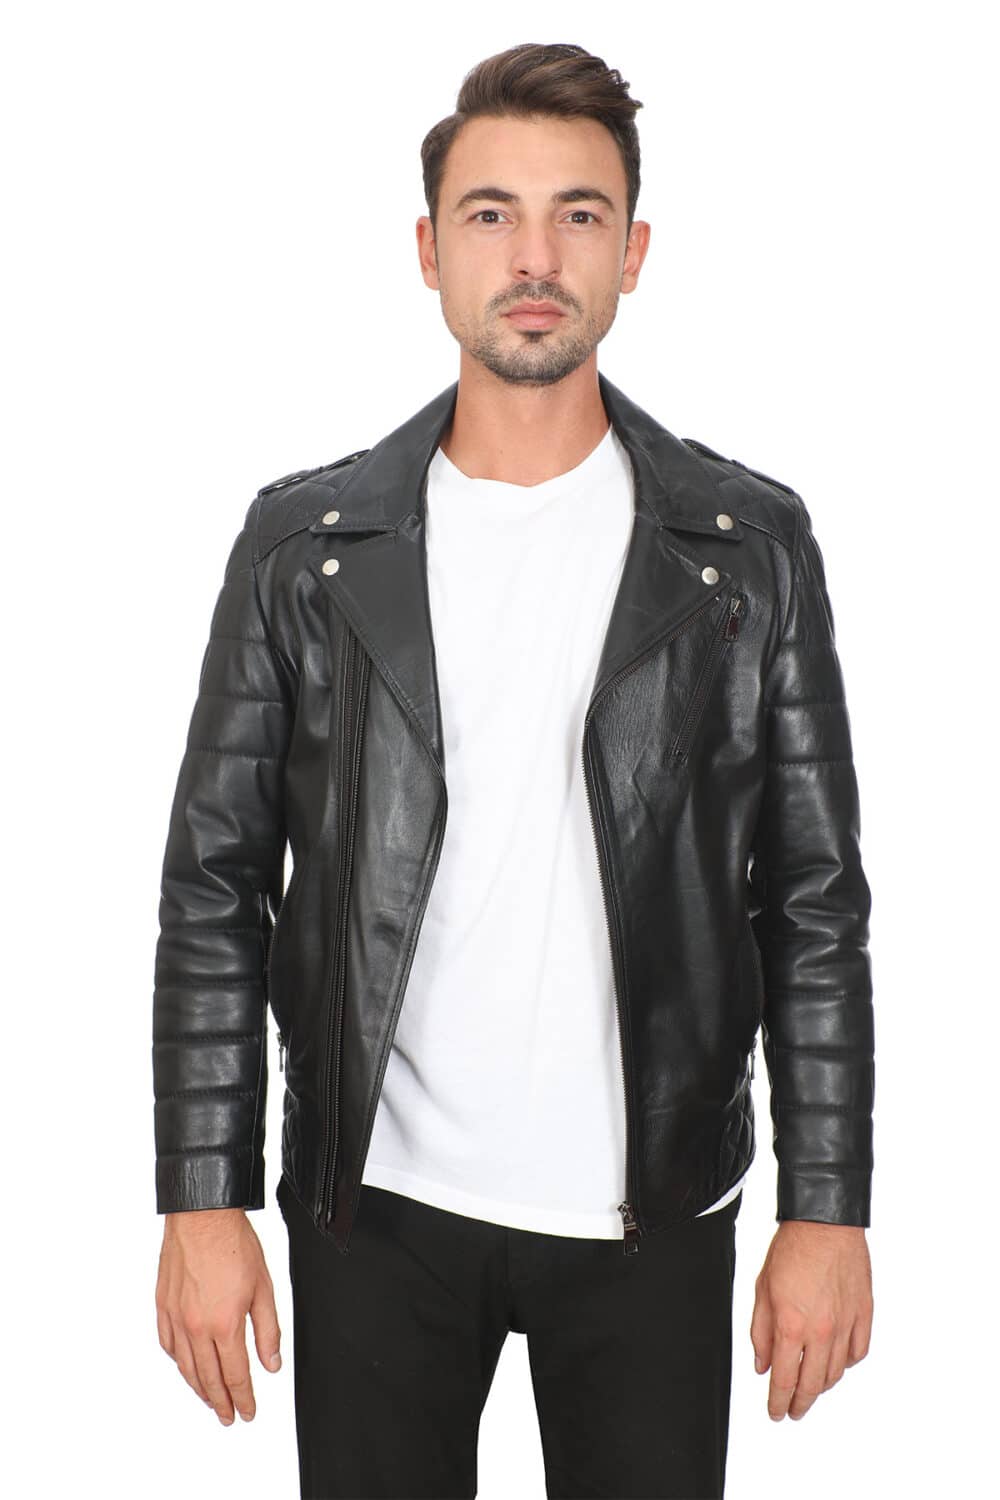 Tobacco Brown Men's Leather Jacket - Fashion Leather Jackets